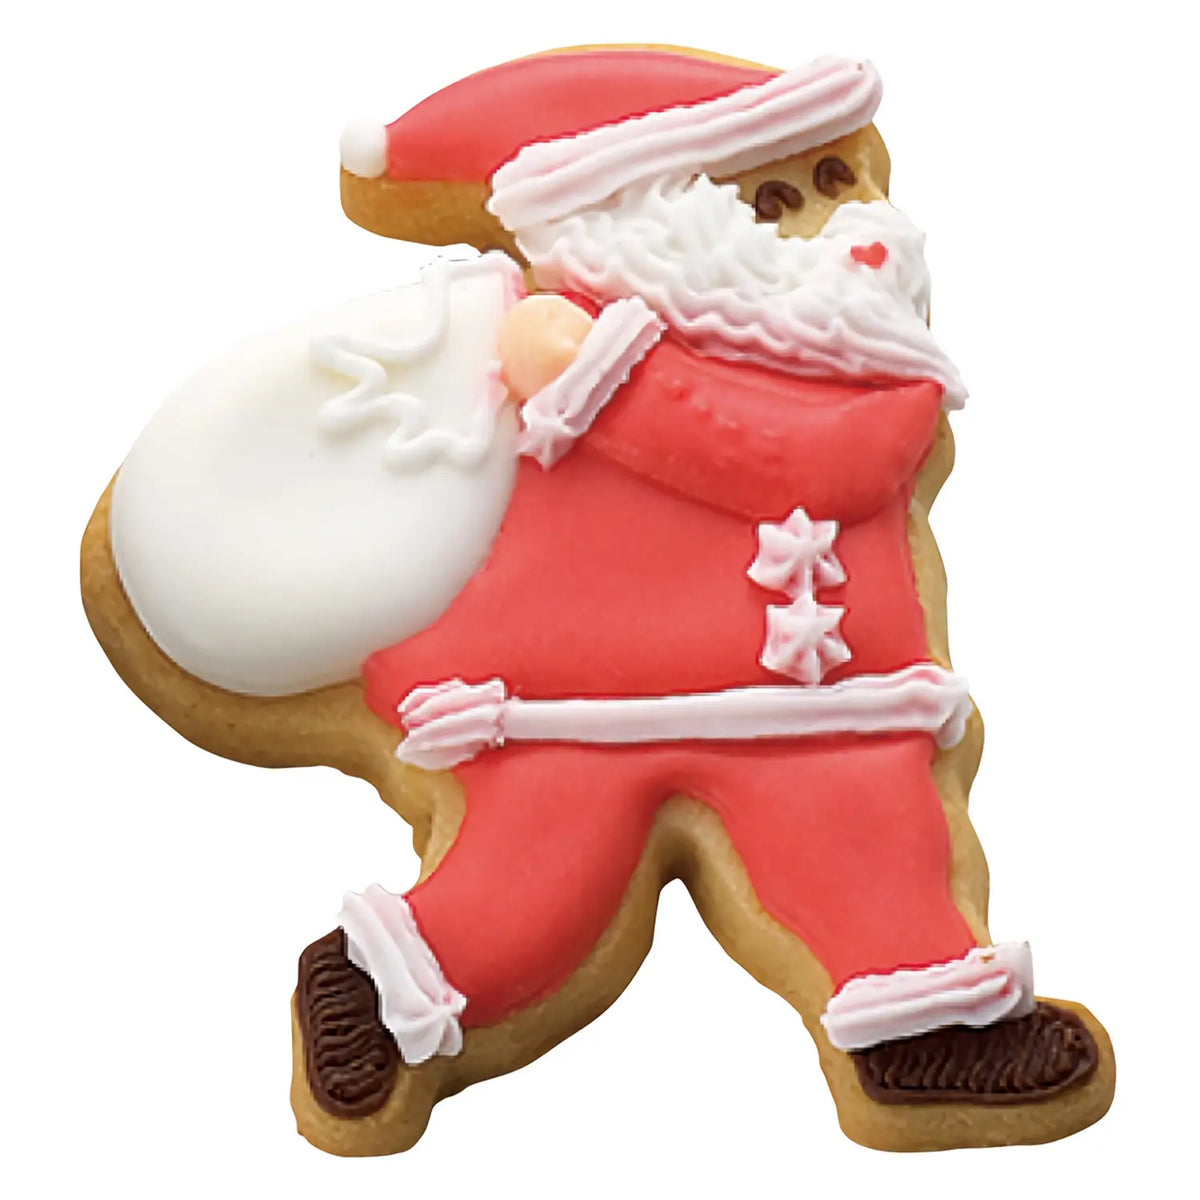 TIGERCROWN Cake Land Stainless Steel Cookie Cutter Santa Claus